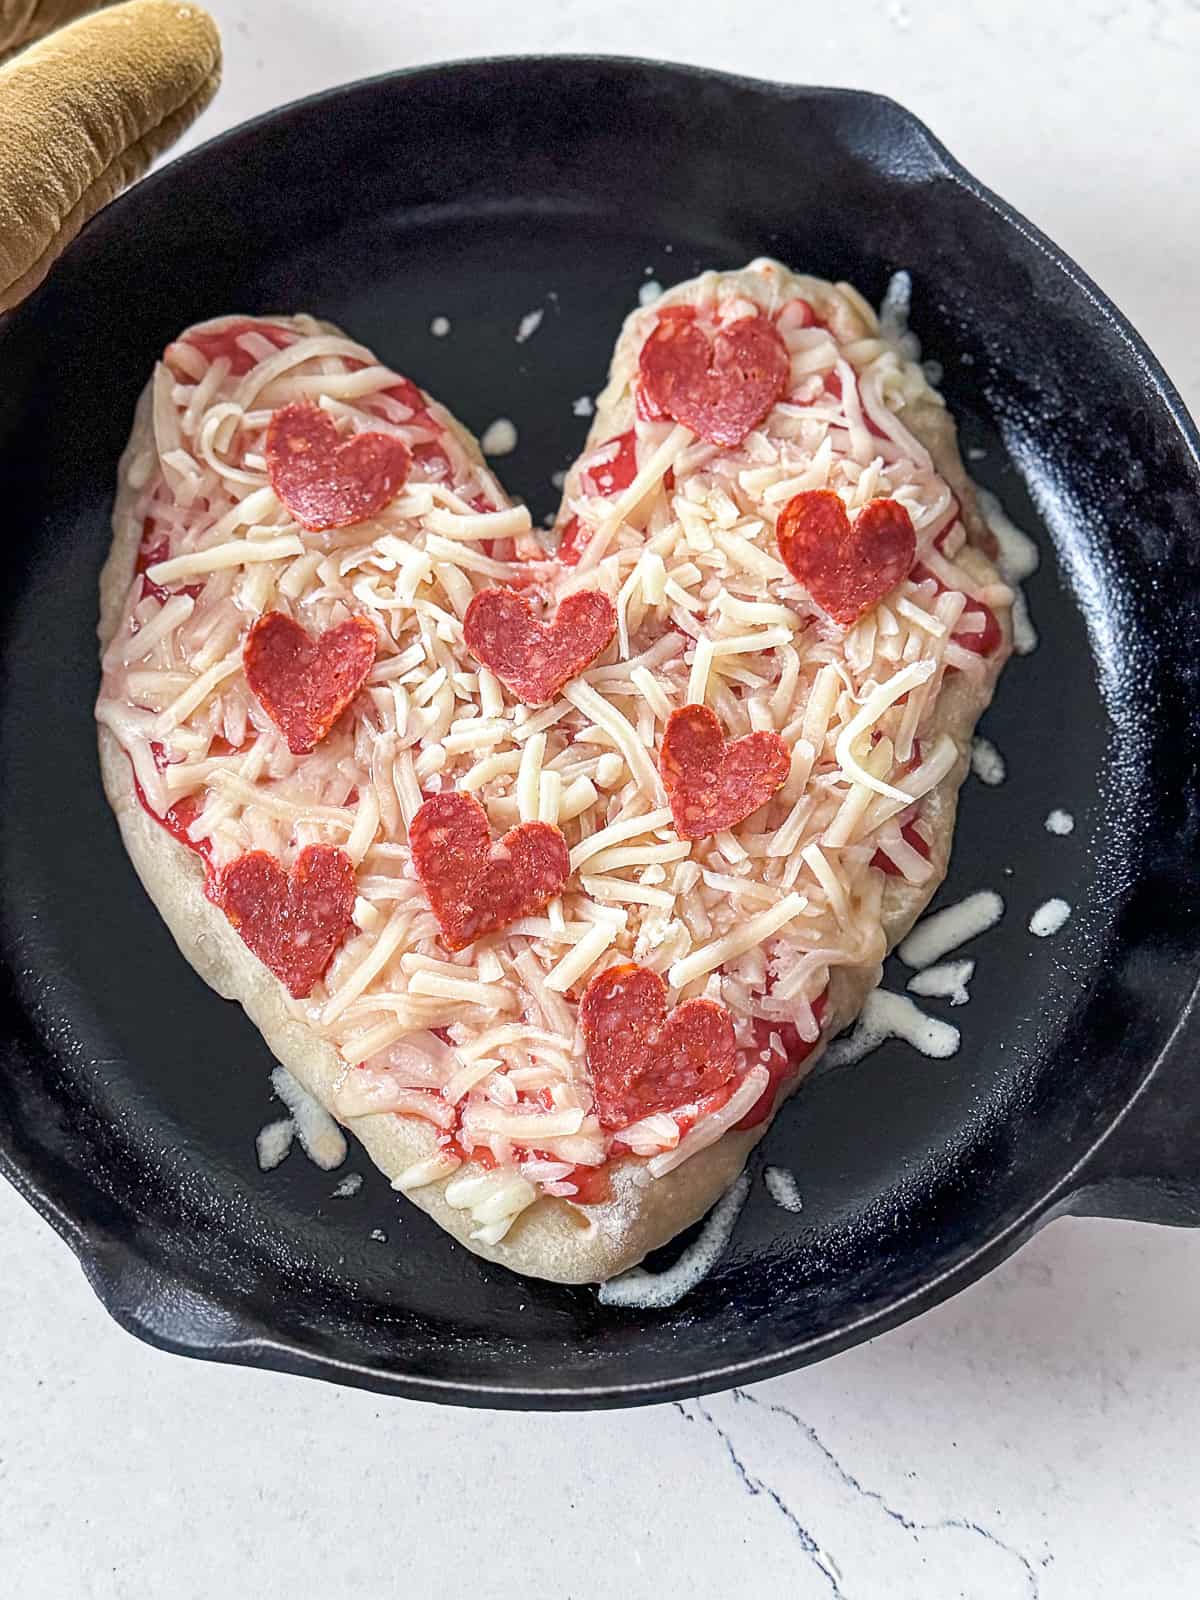 Prepping Valentines Day Heart Pizza with Pepperoni